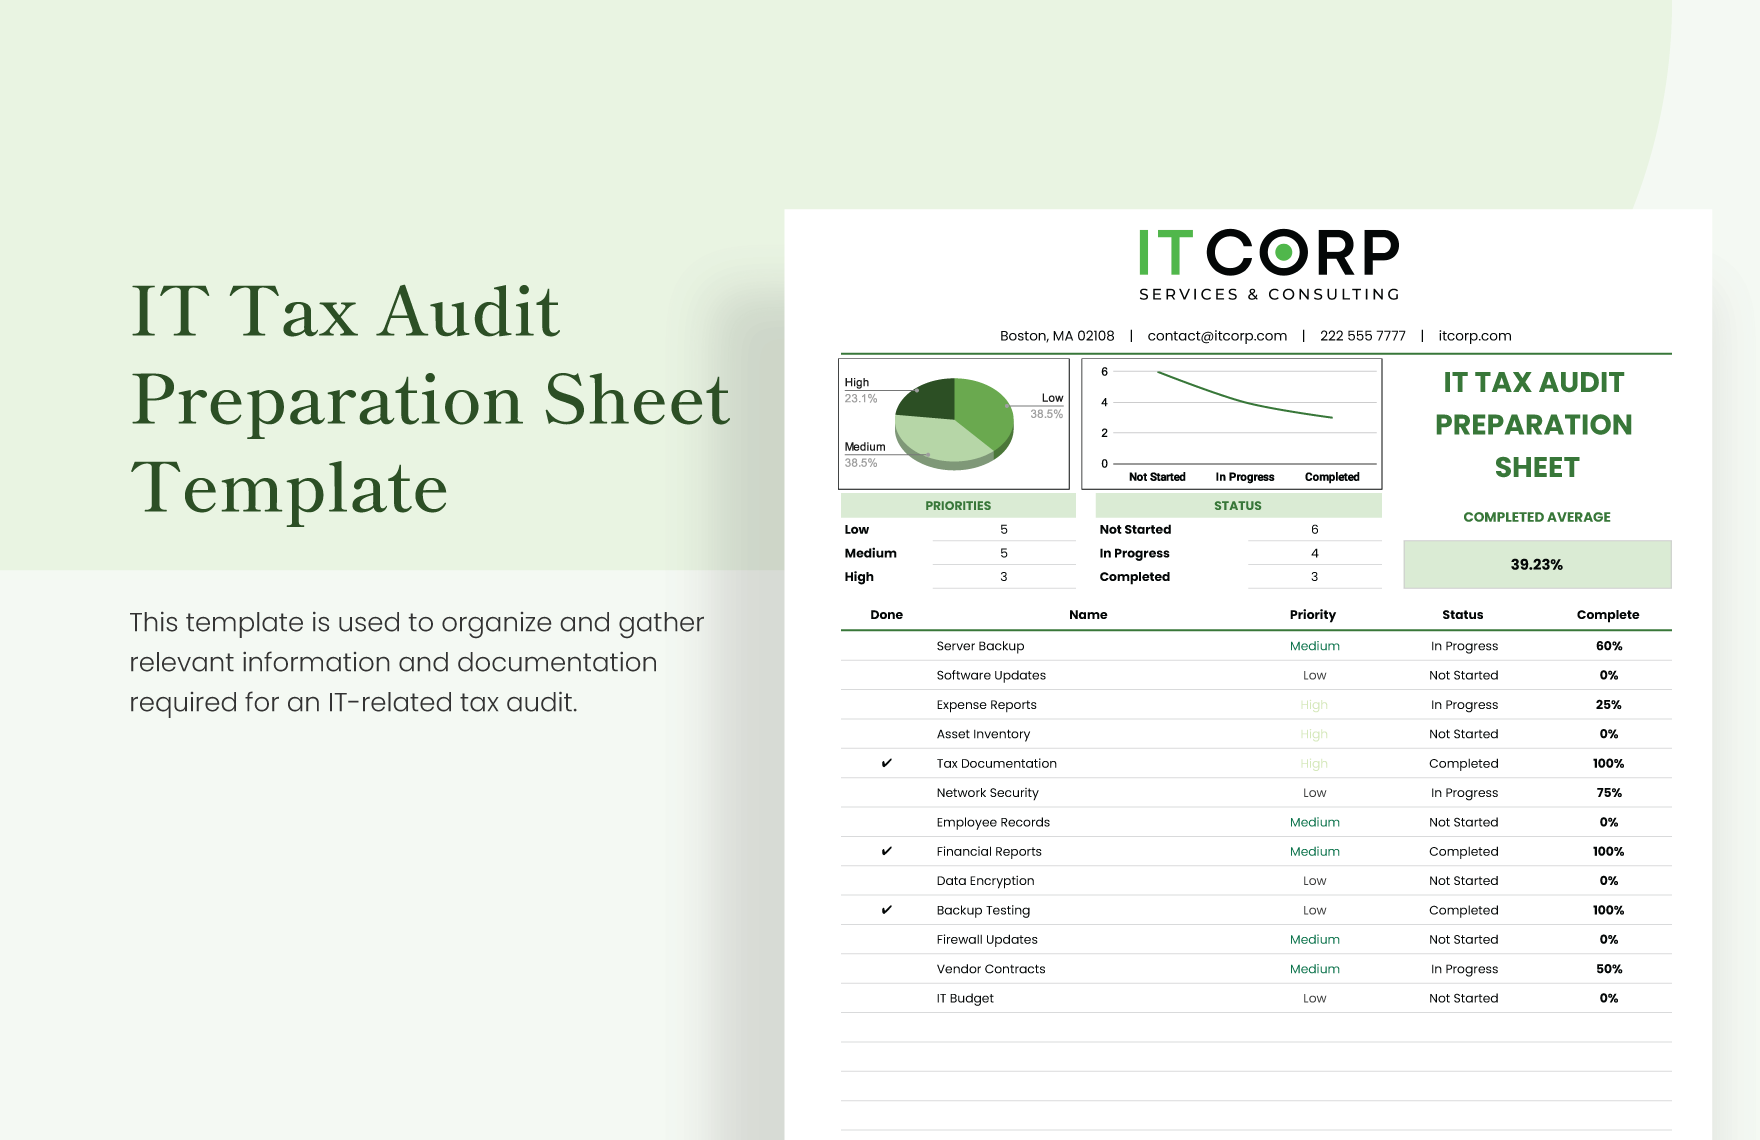 IT Tax Audit Preparation Sheet Template in Excel, Google Sheets